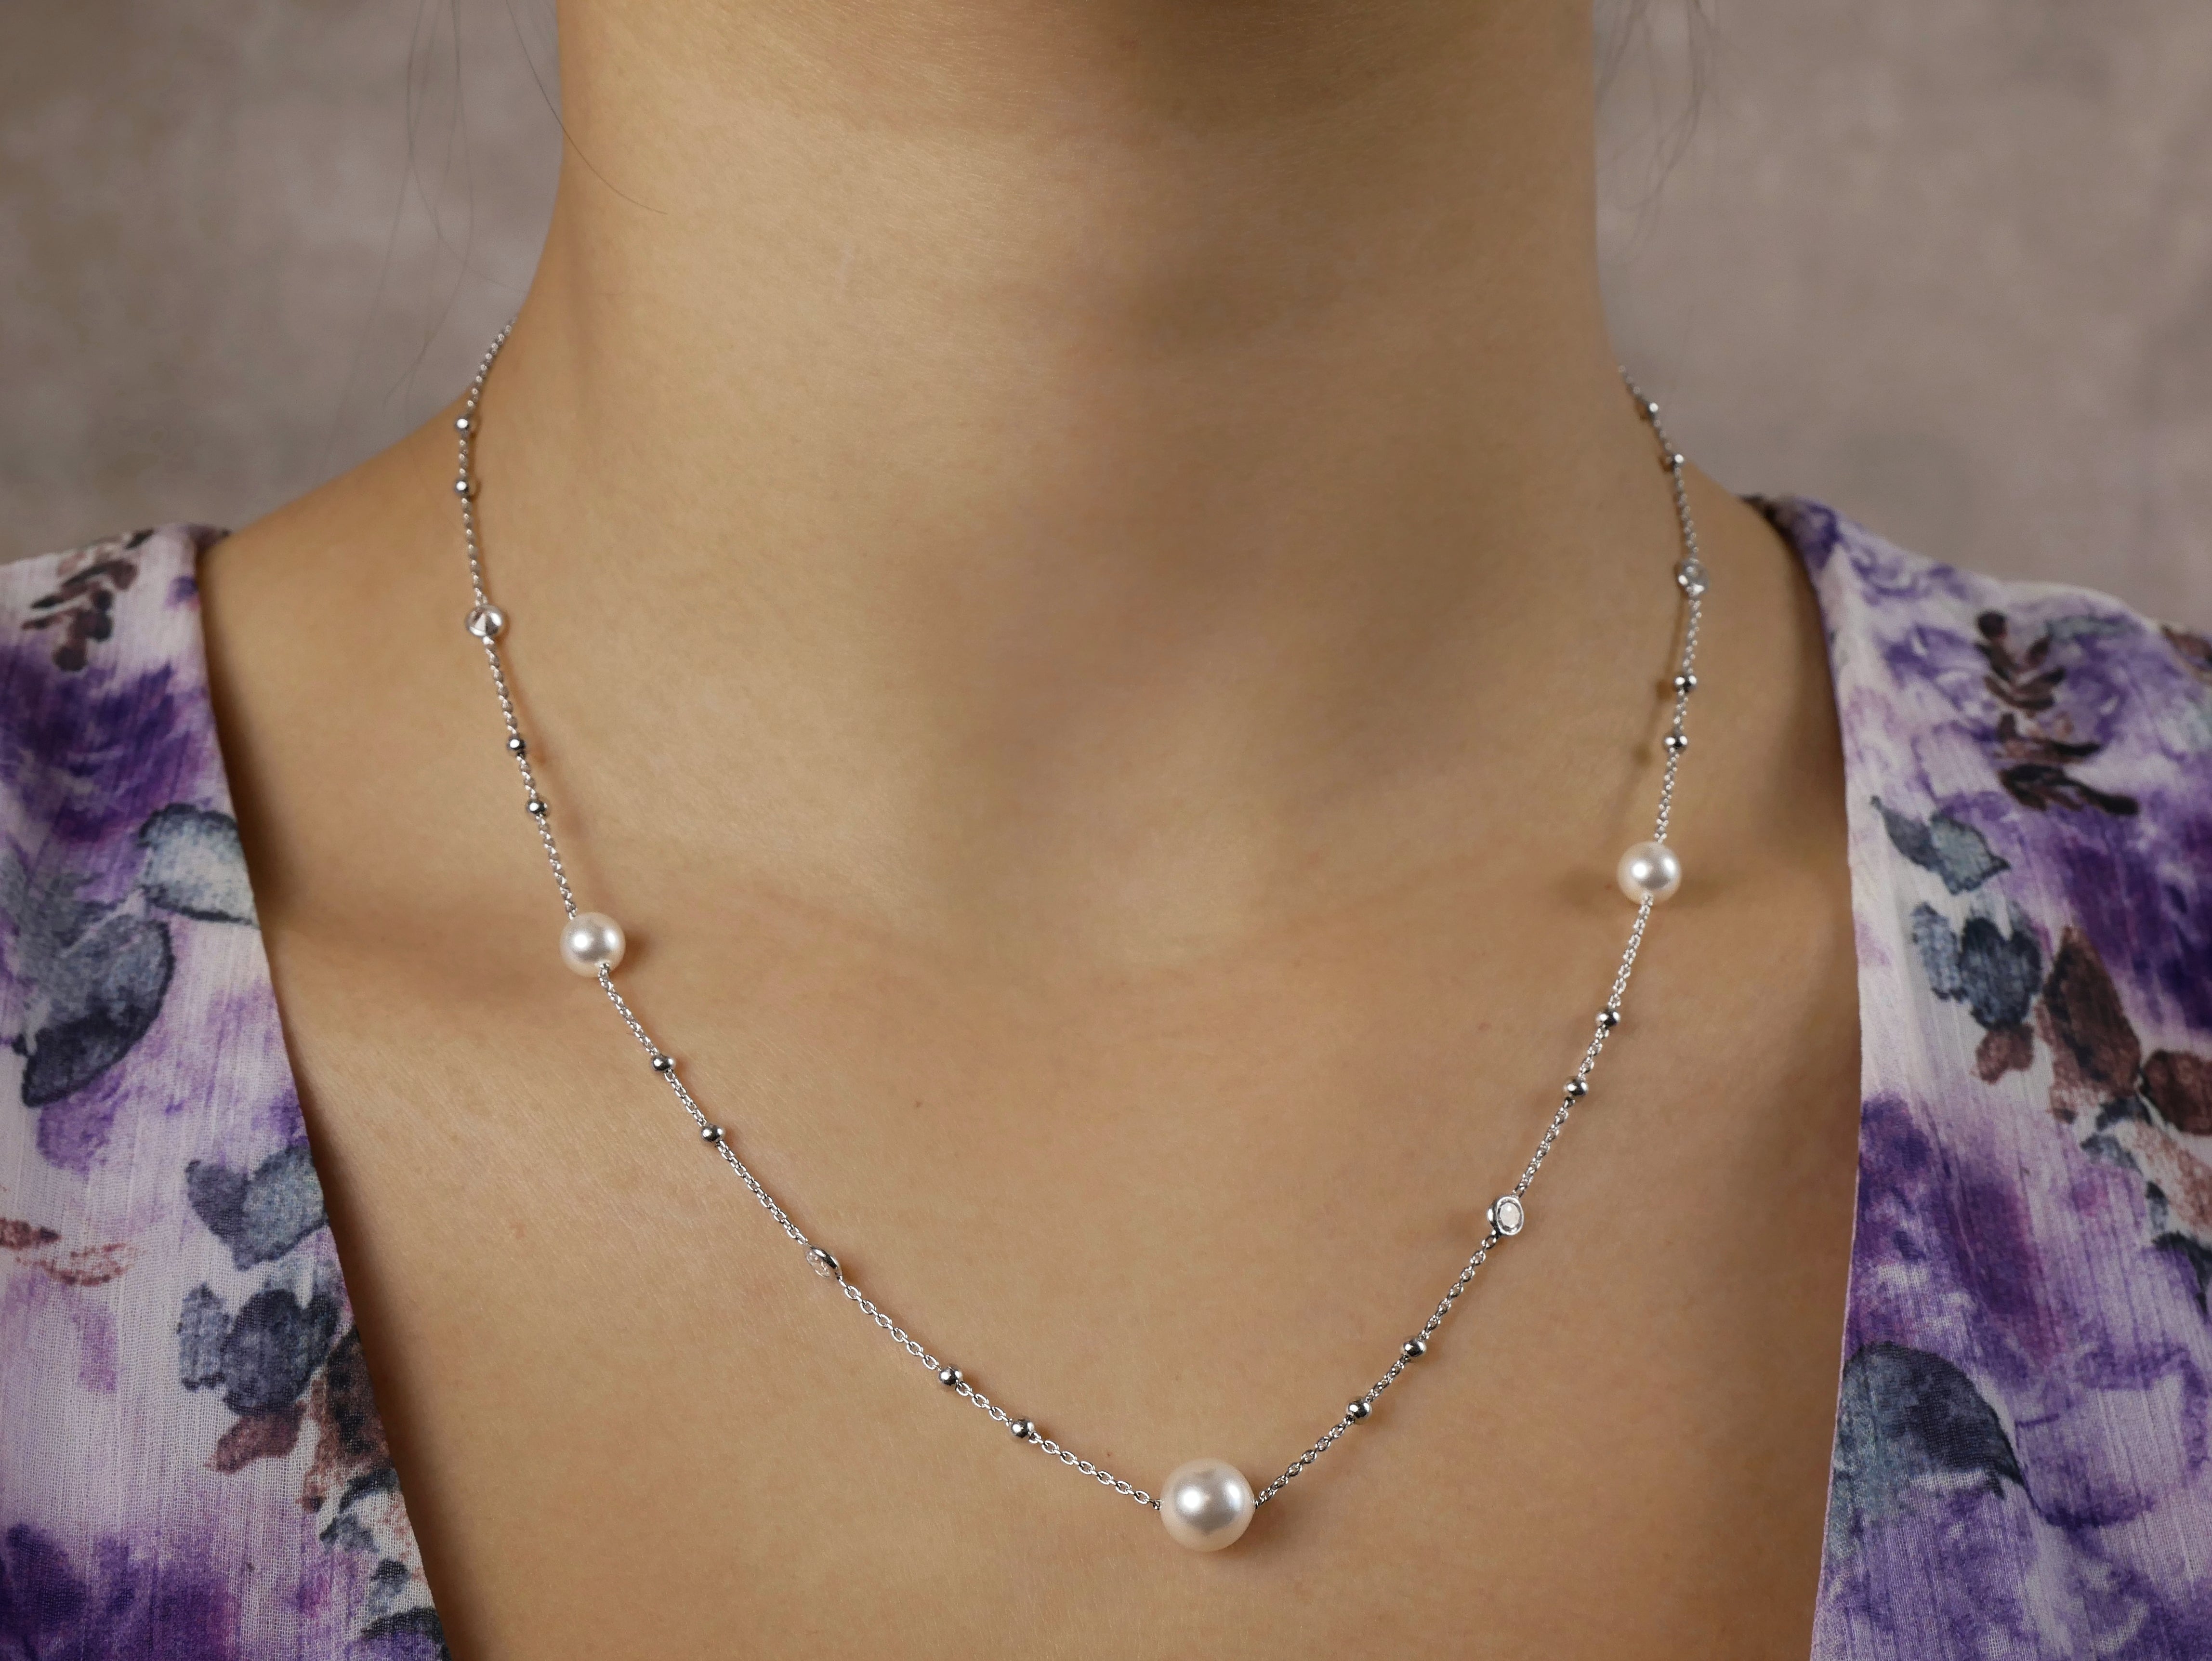 PEARL Classic Necklace with Swarovski Elements